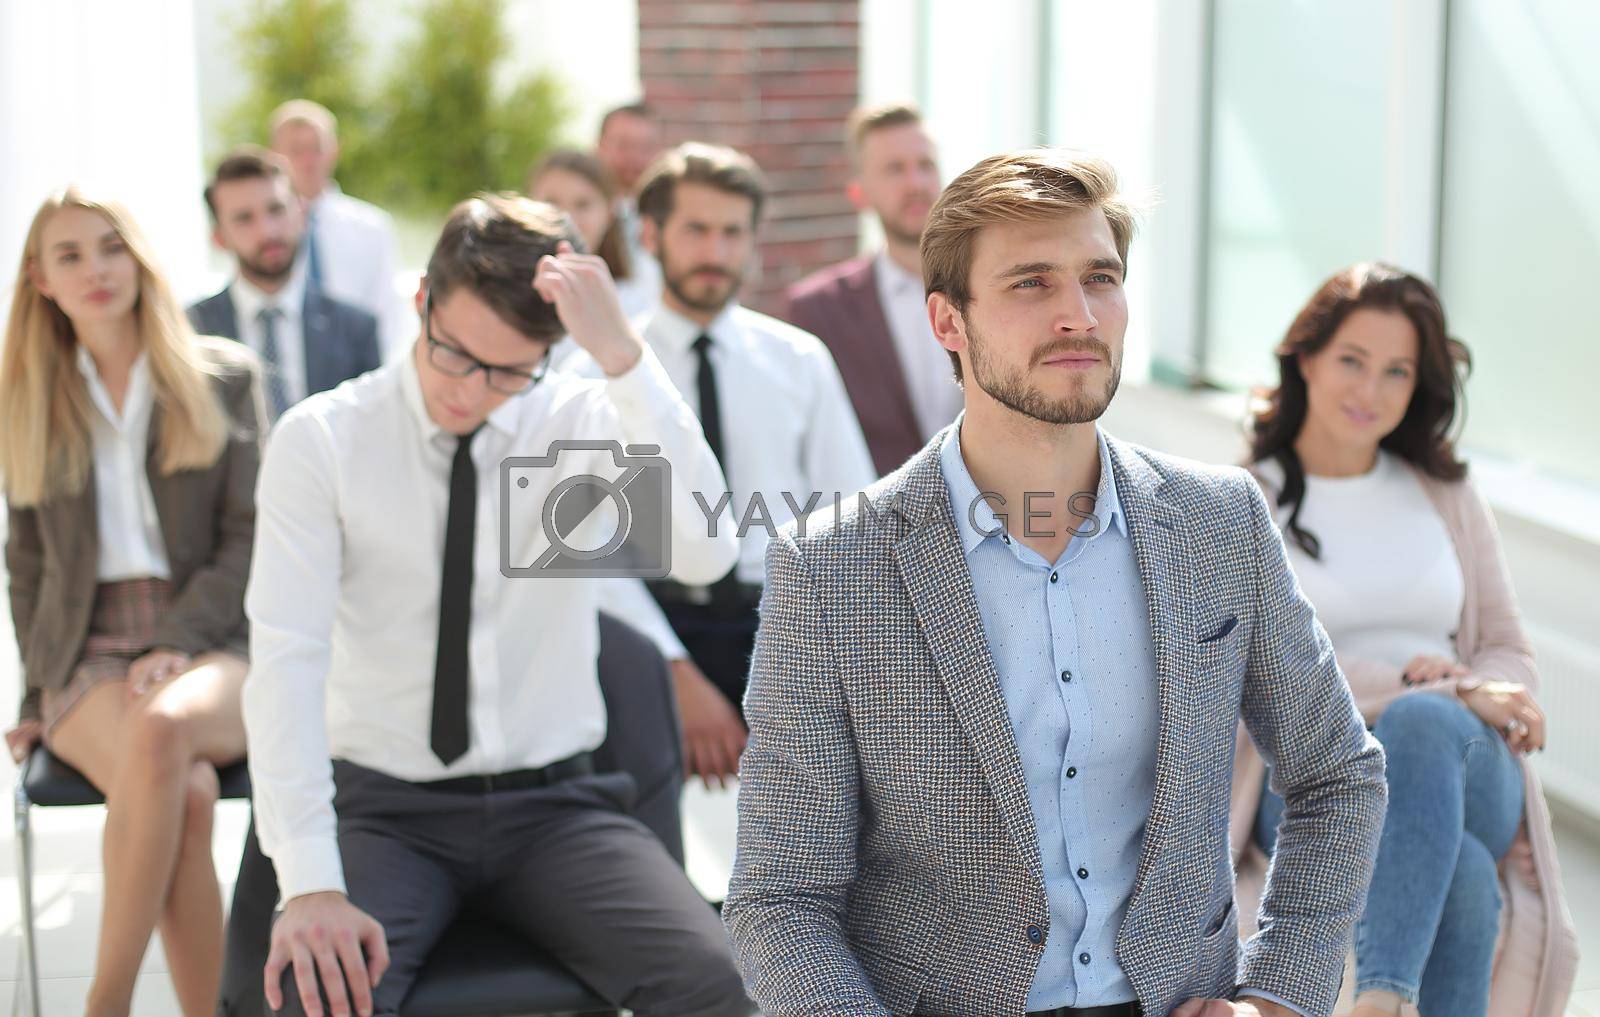 Royalty free image of group of business people at the training event by asdf